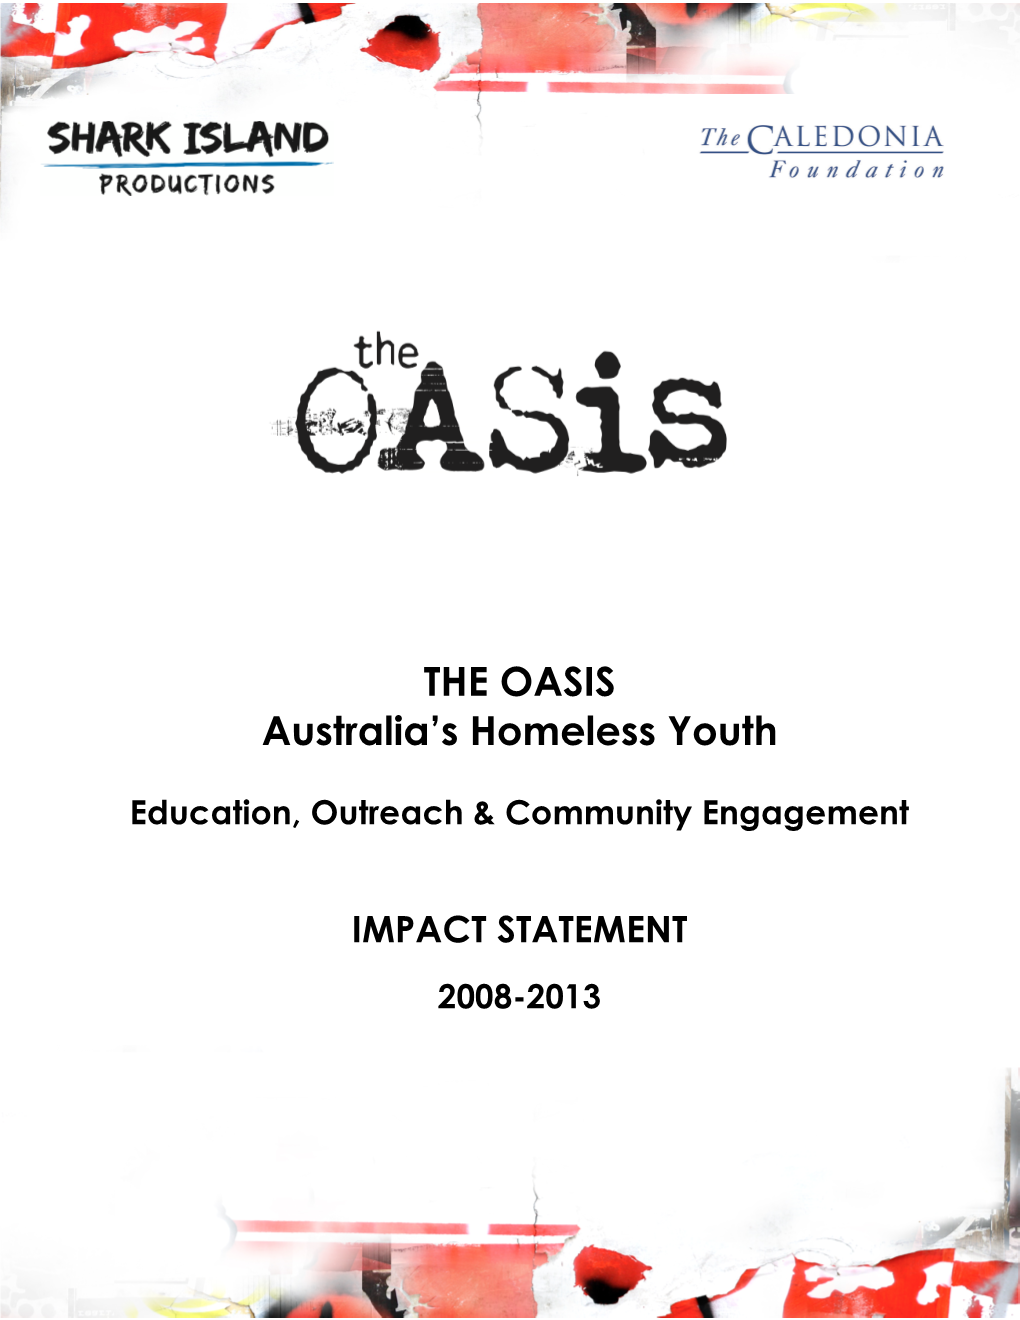 To Download › the Oasis Impact Statement